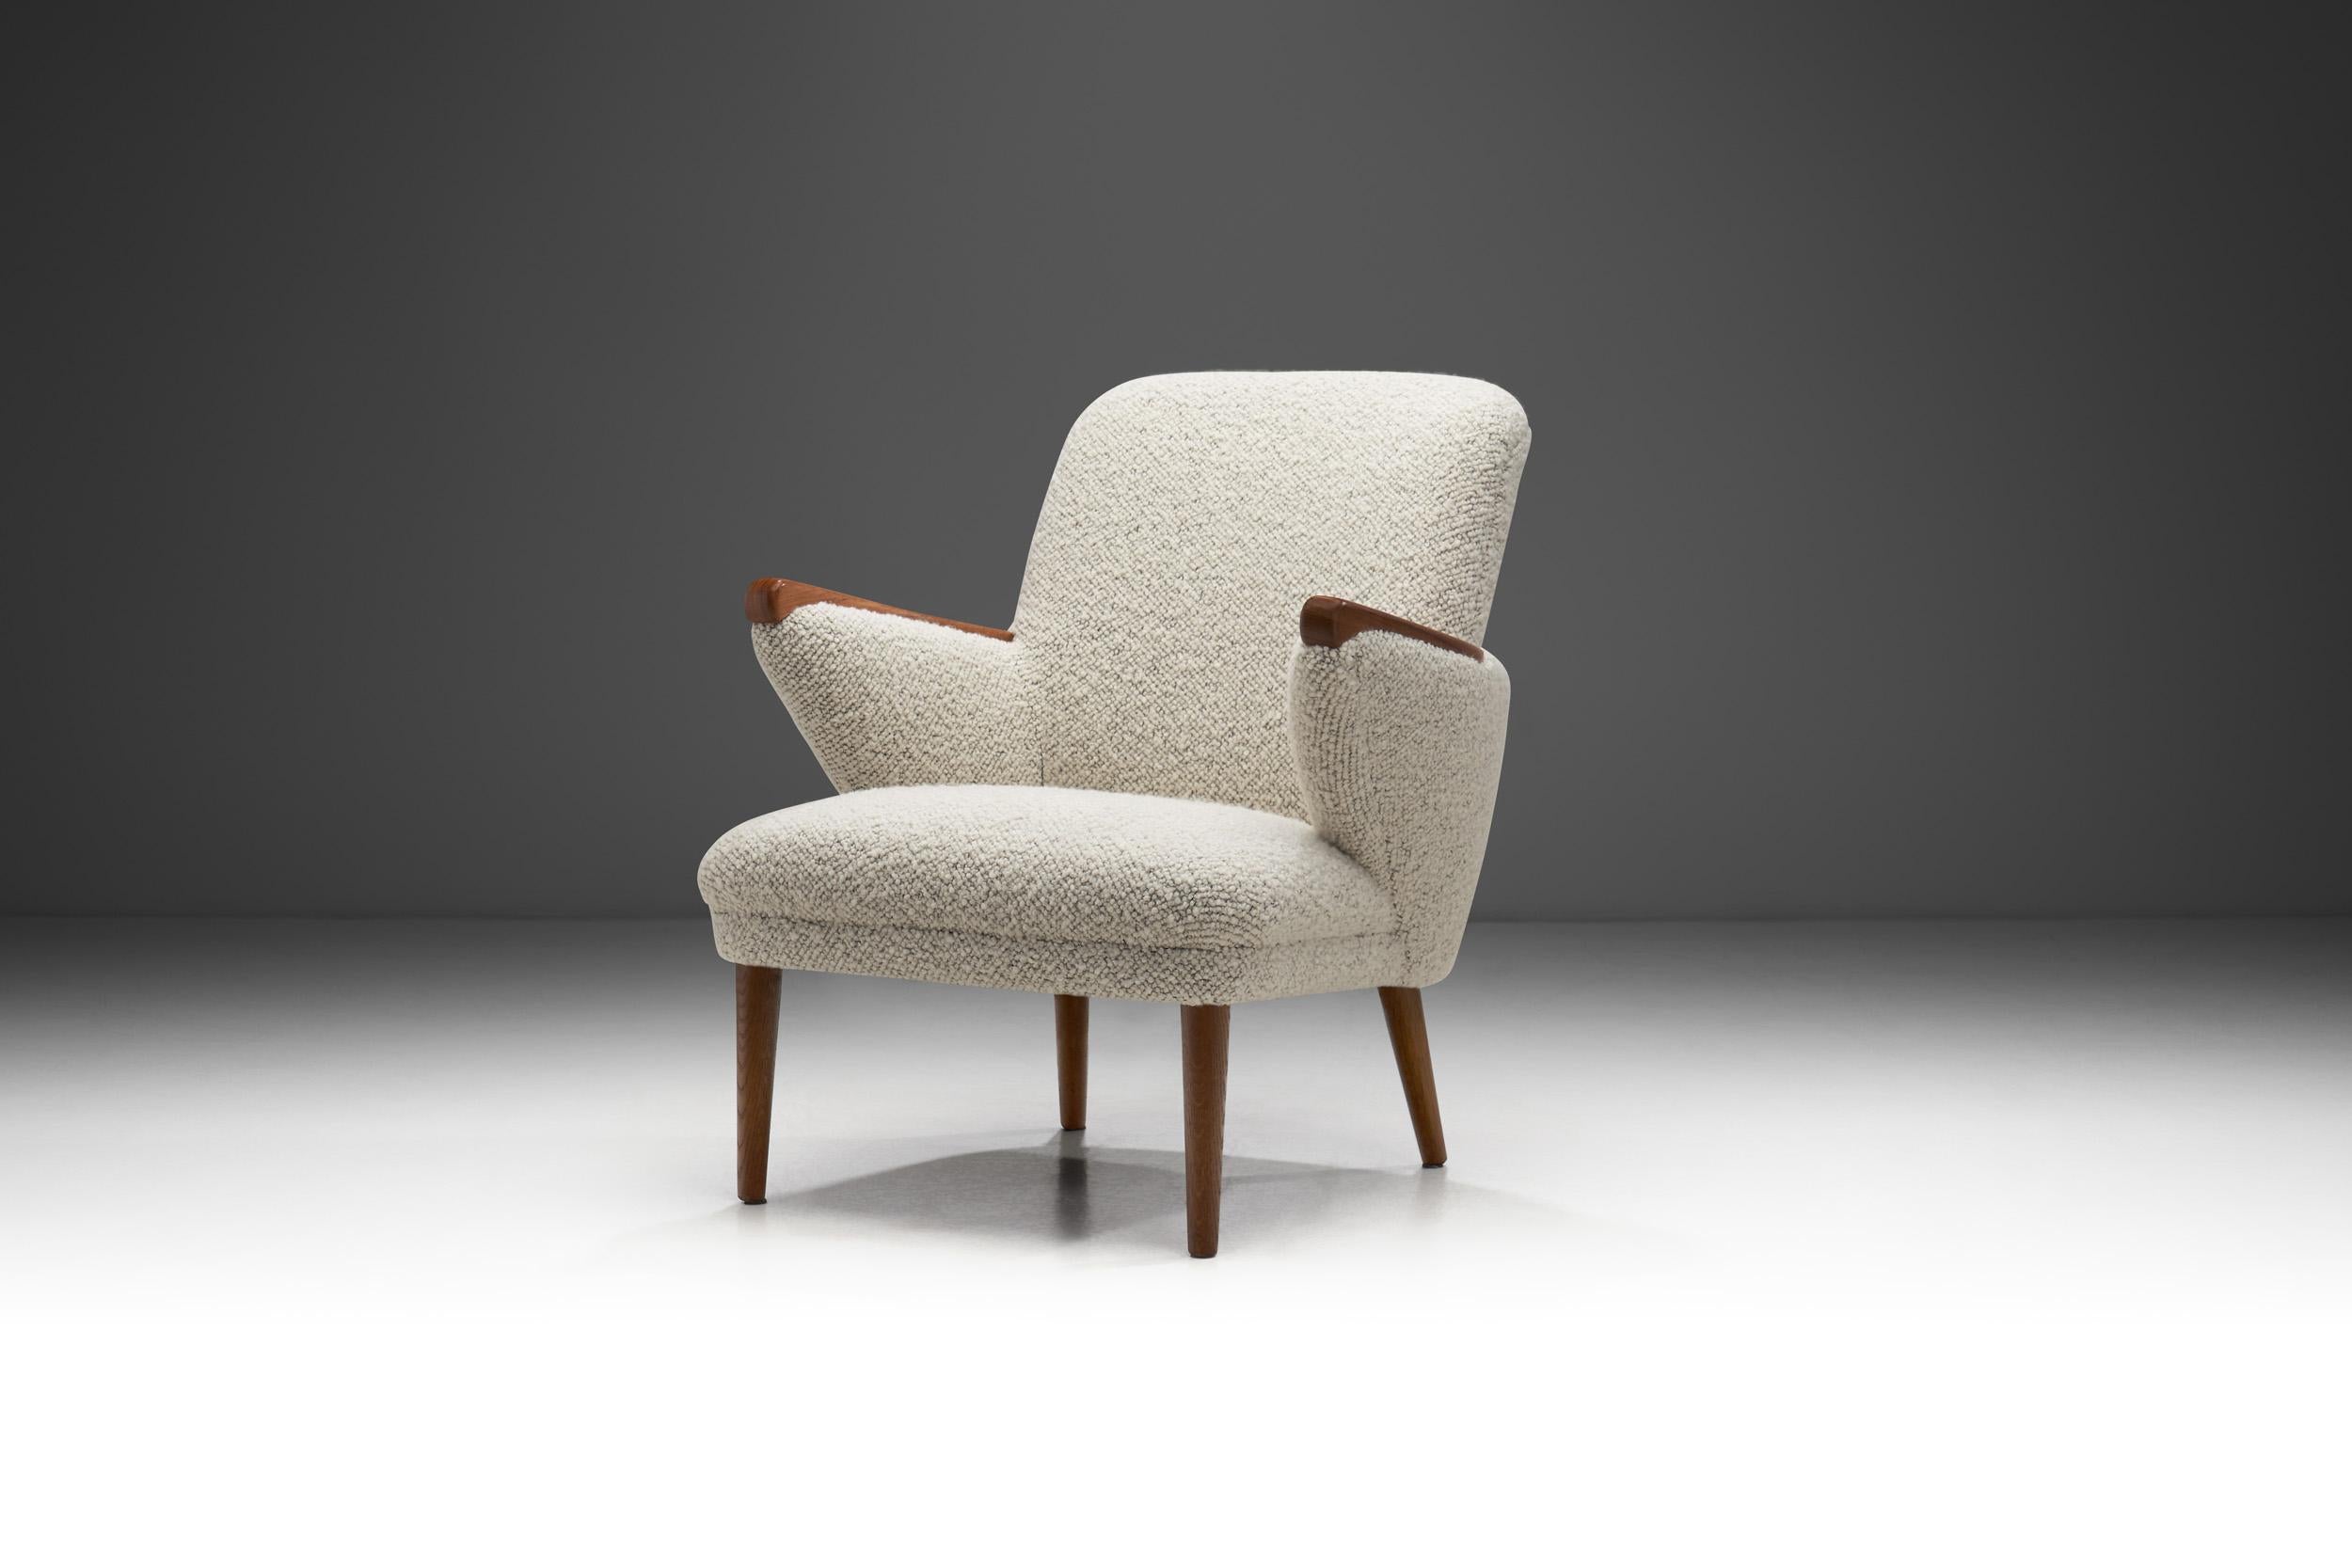 The Danish cabinetmakers' annual exhibitions began in 1927 and continued through until 1966, for almost the whole of what is now seen as the classic period of early modern Danish design. This easy chair carries subtle, but obvious features of this